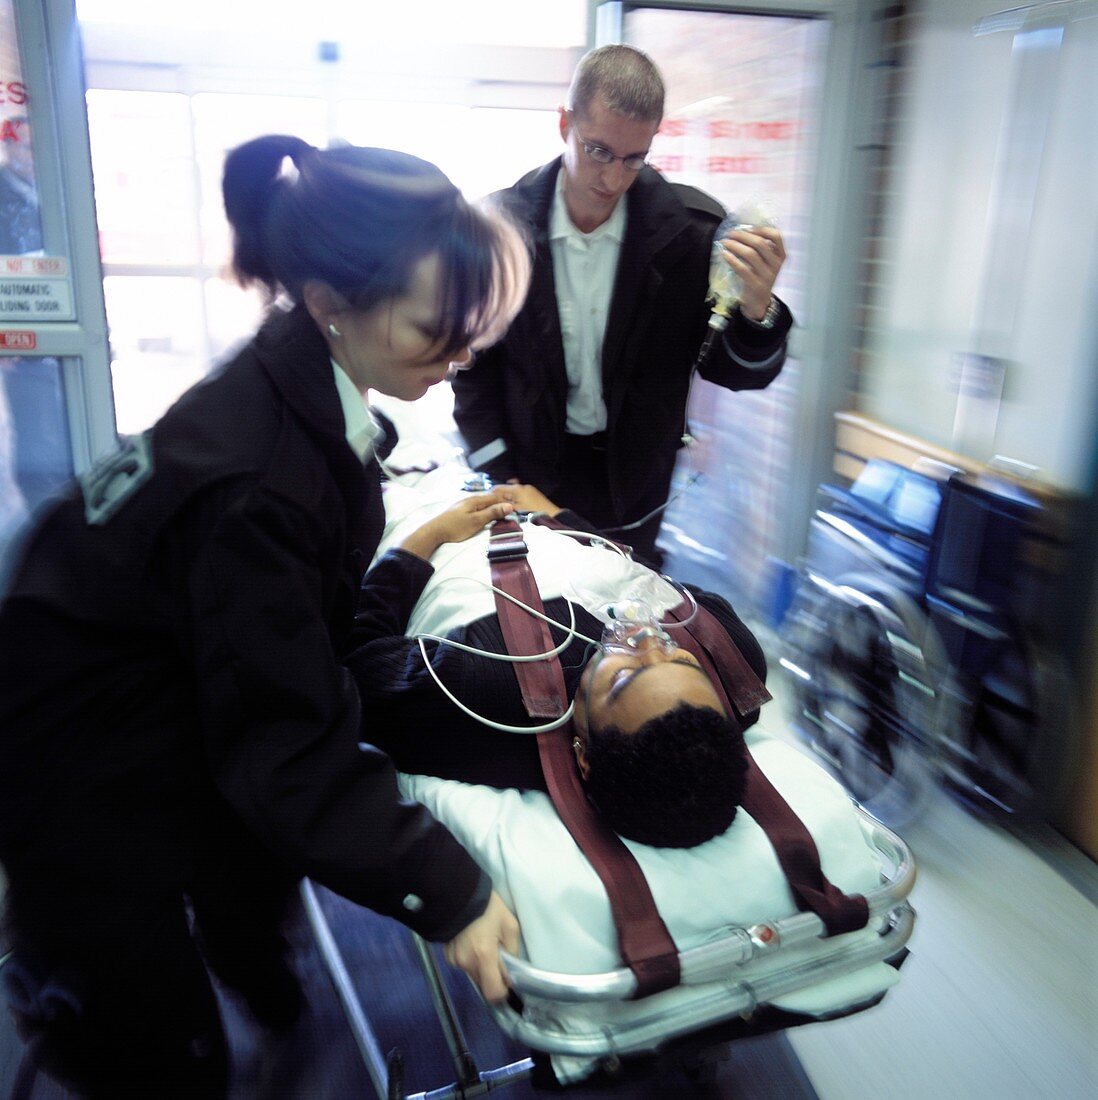 Emergency patient arriving at a hospital